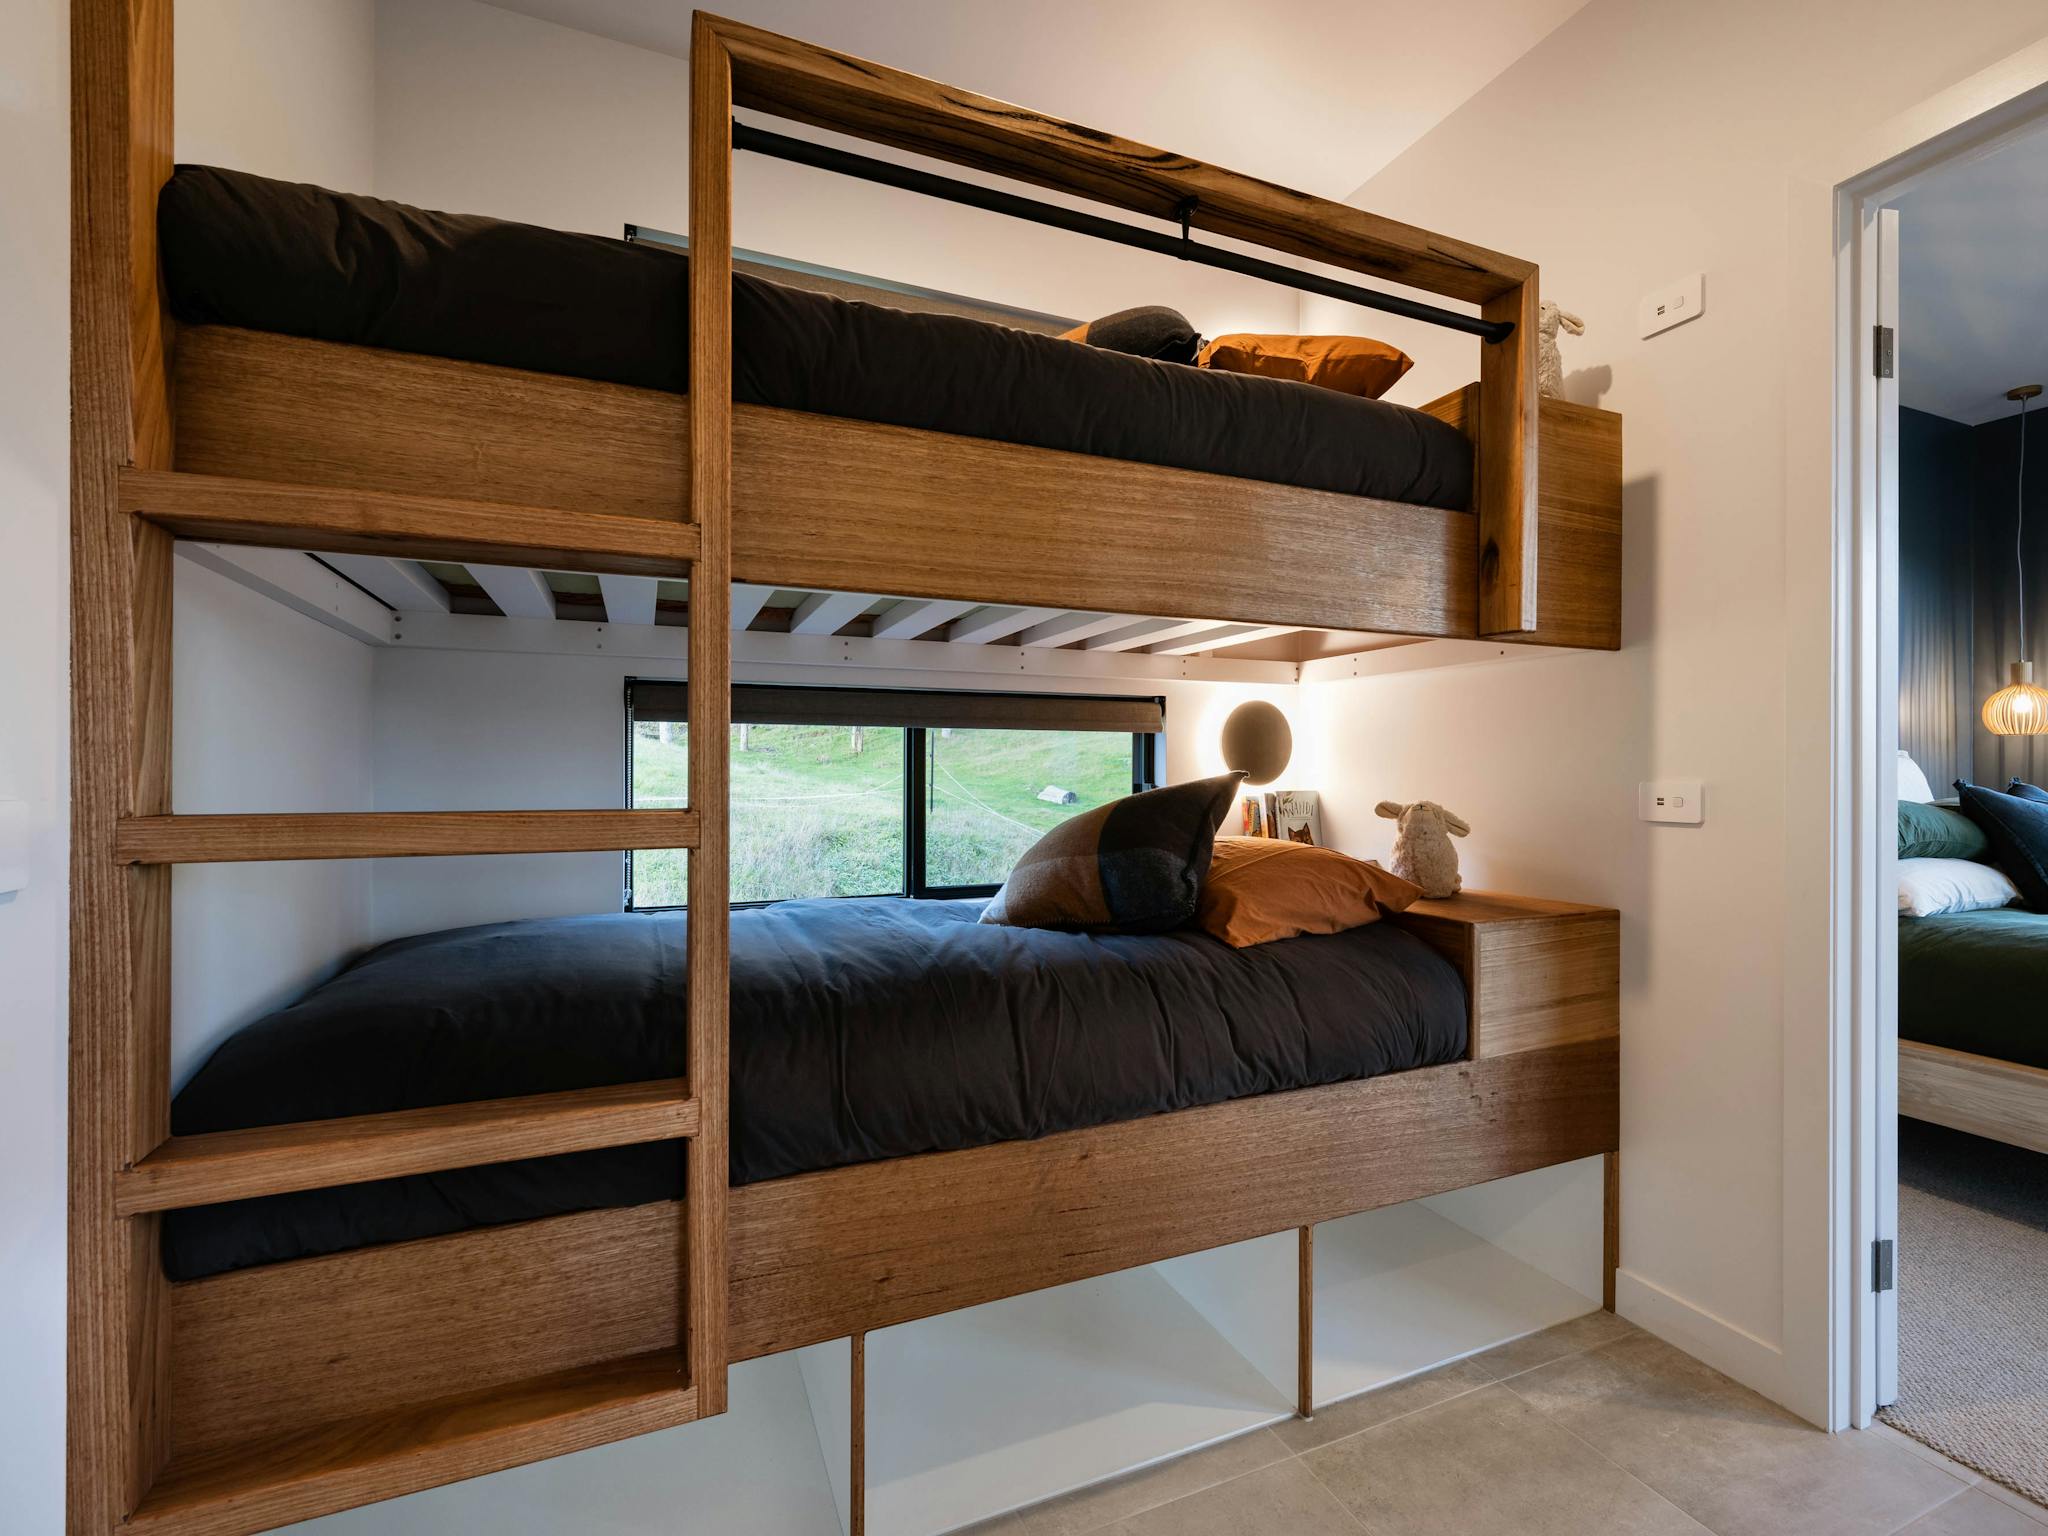 Custom built in bunk beds each with own windows, lighting and USB charger